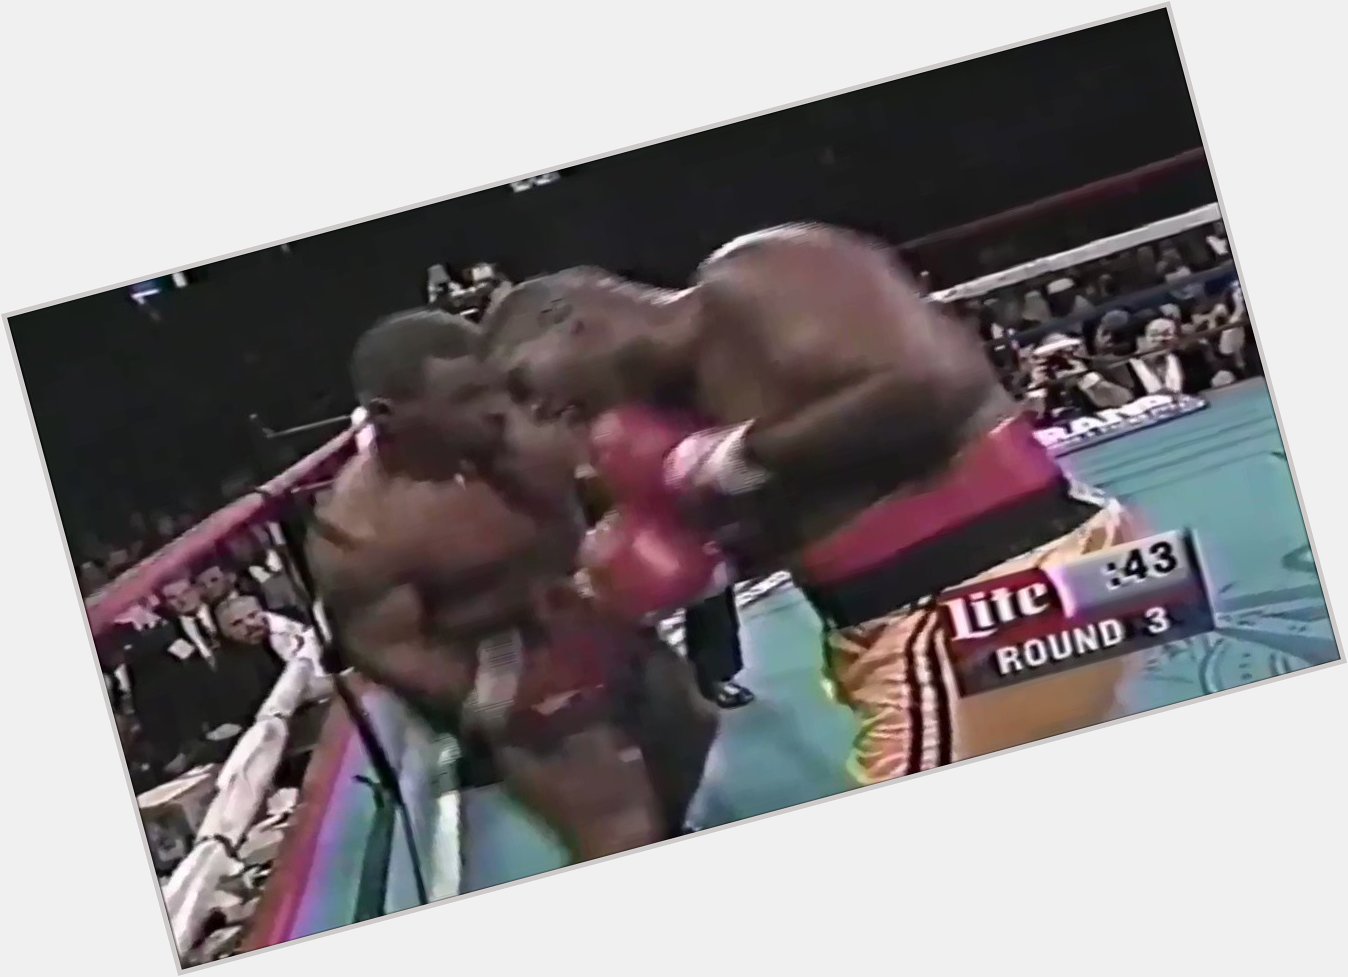 Some classic Mike Tyson knockouts, happy birthday champ  : ElTerribleProduction 